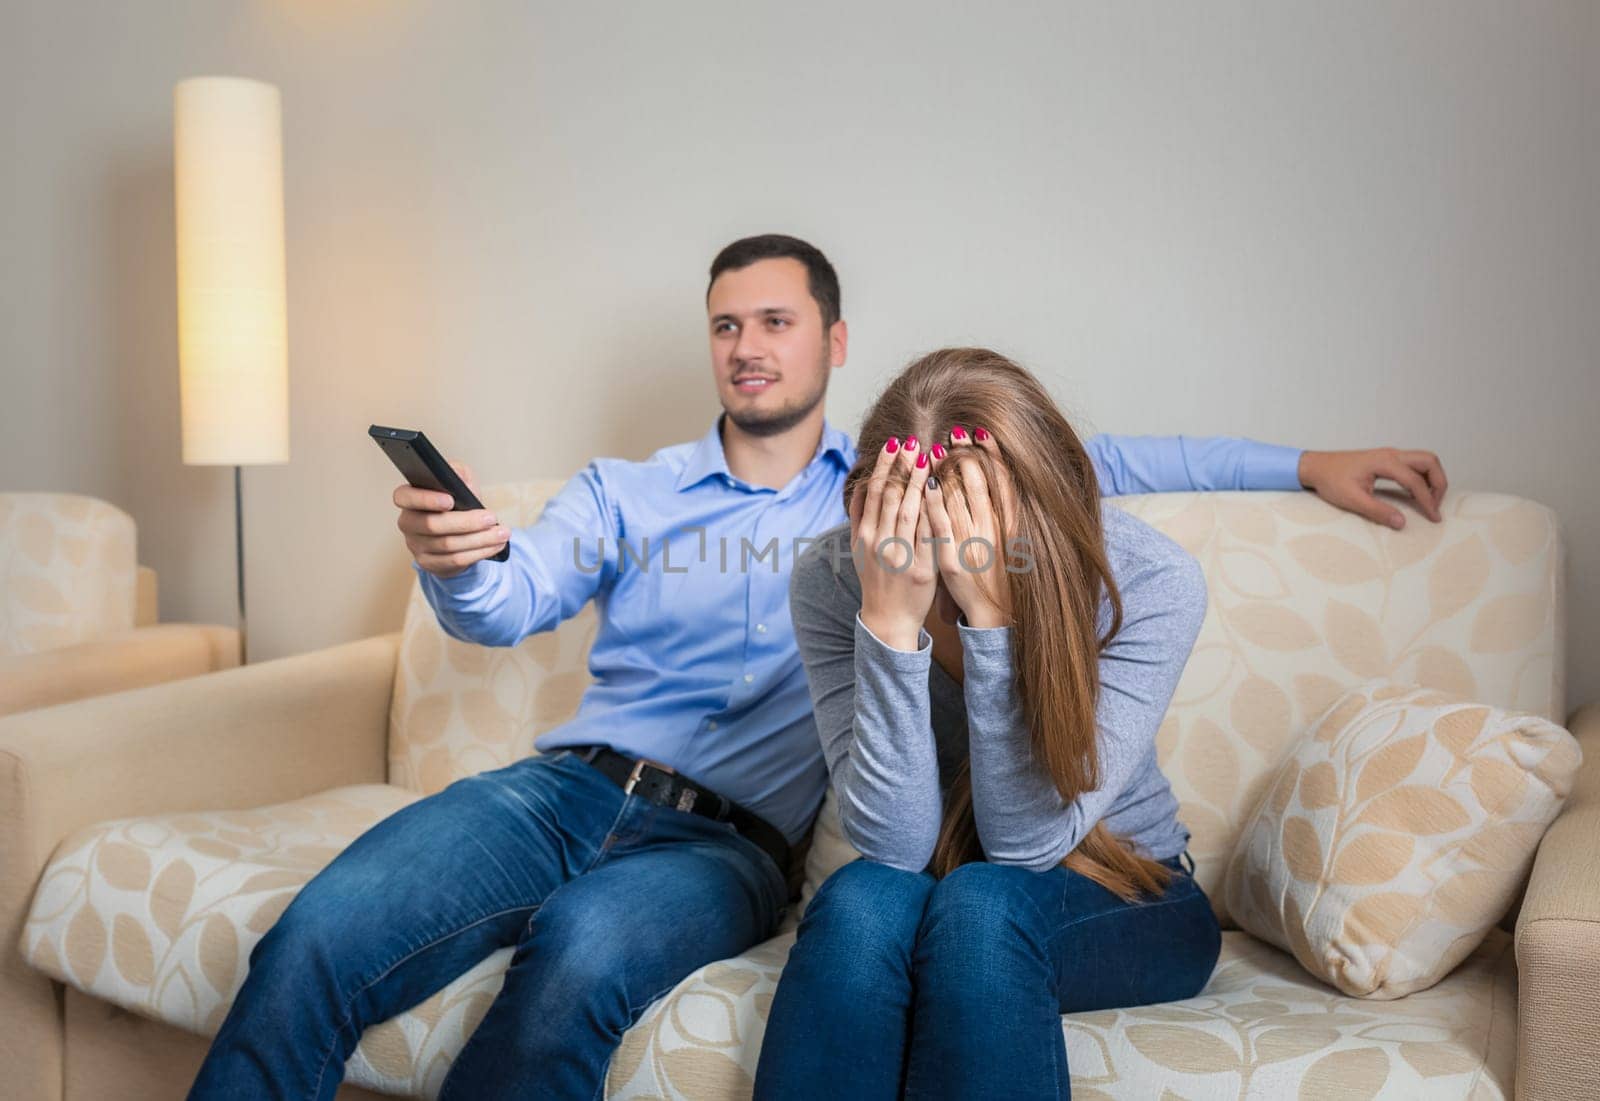 Portrait of couple sitting on sofa watching television. Image of men with remote control in hands and upset woman